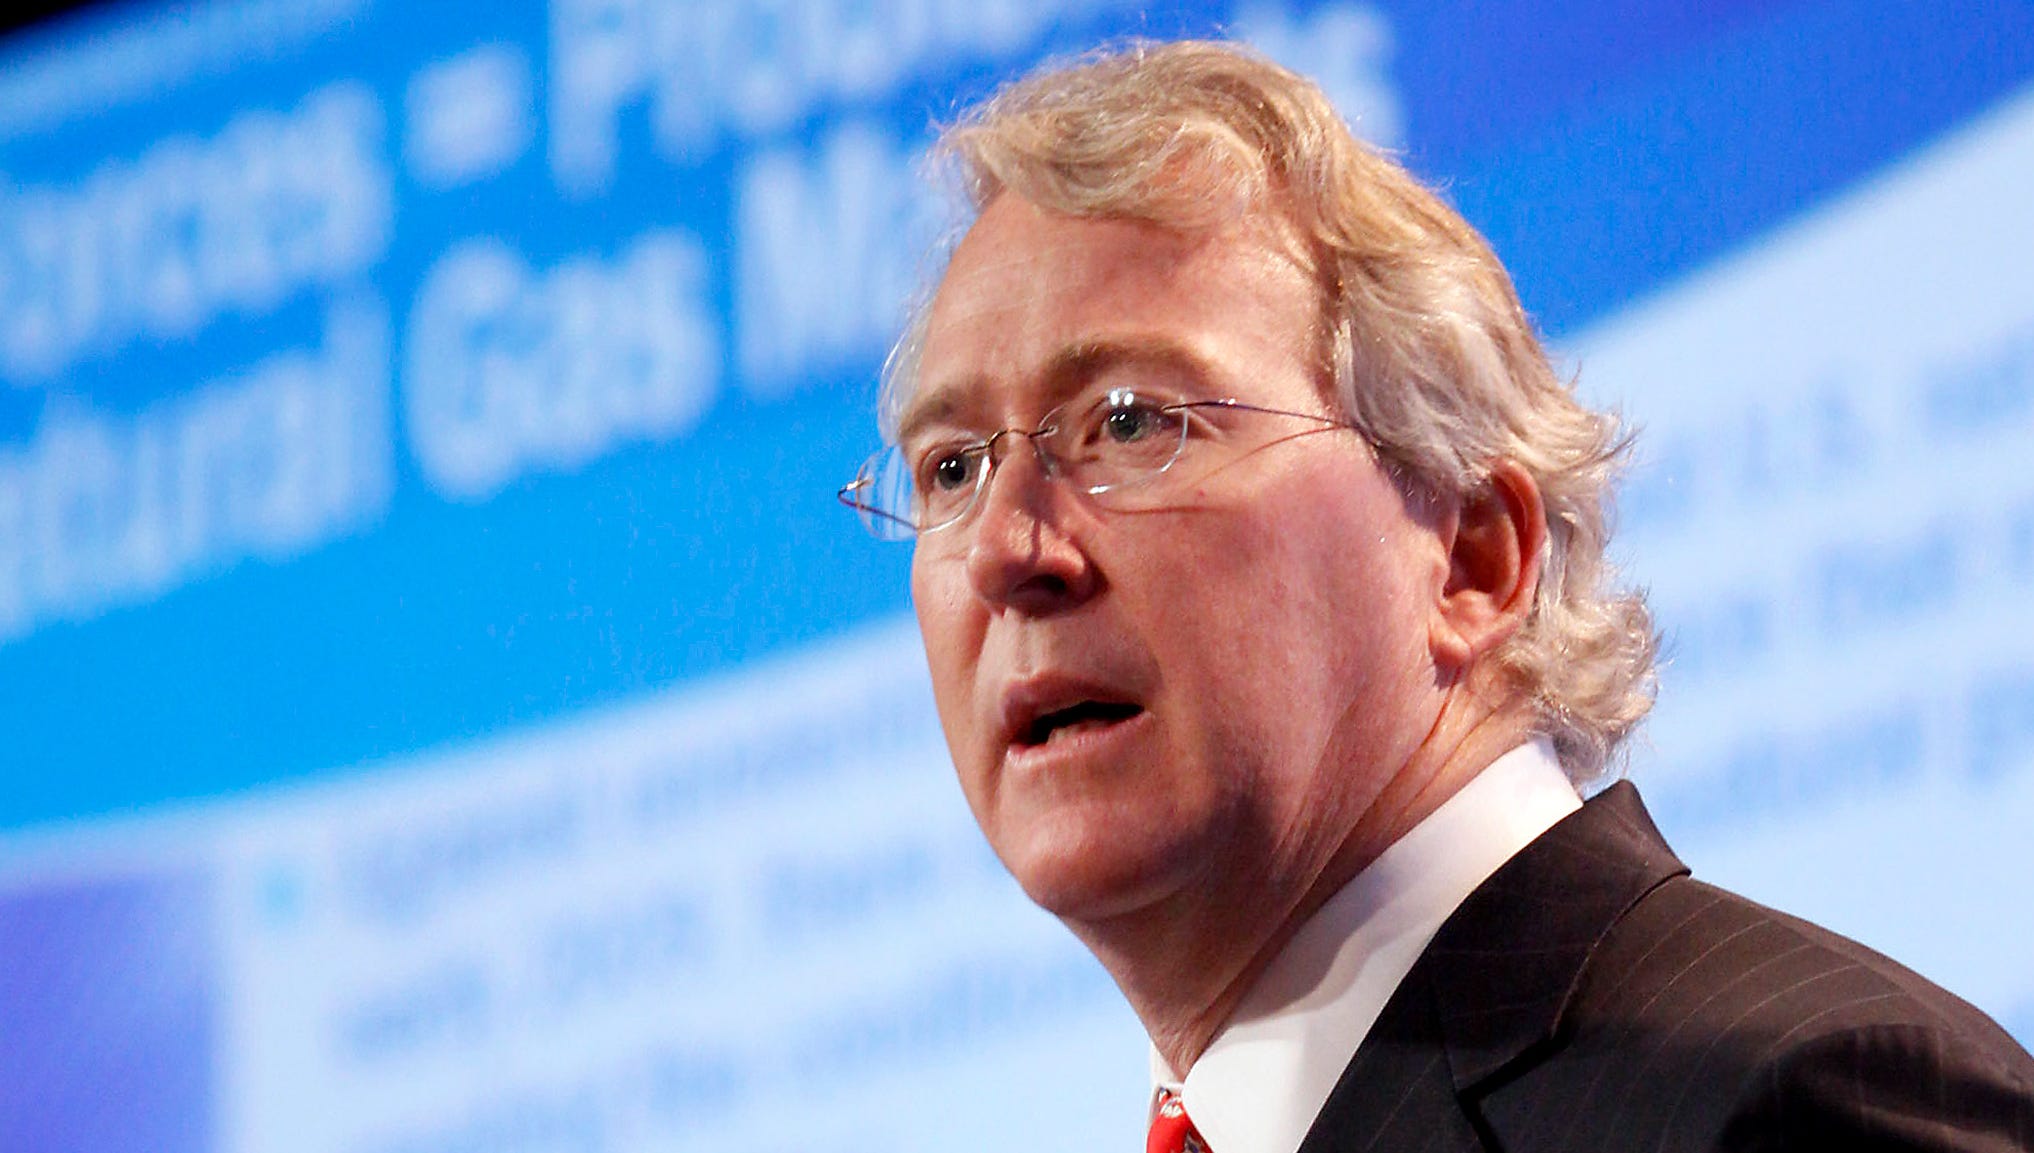 911 Calls Aubrey Mcclendon Swerved And Hit The Wall 